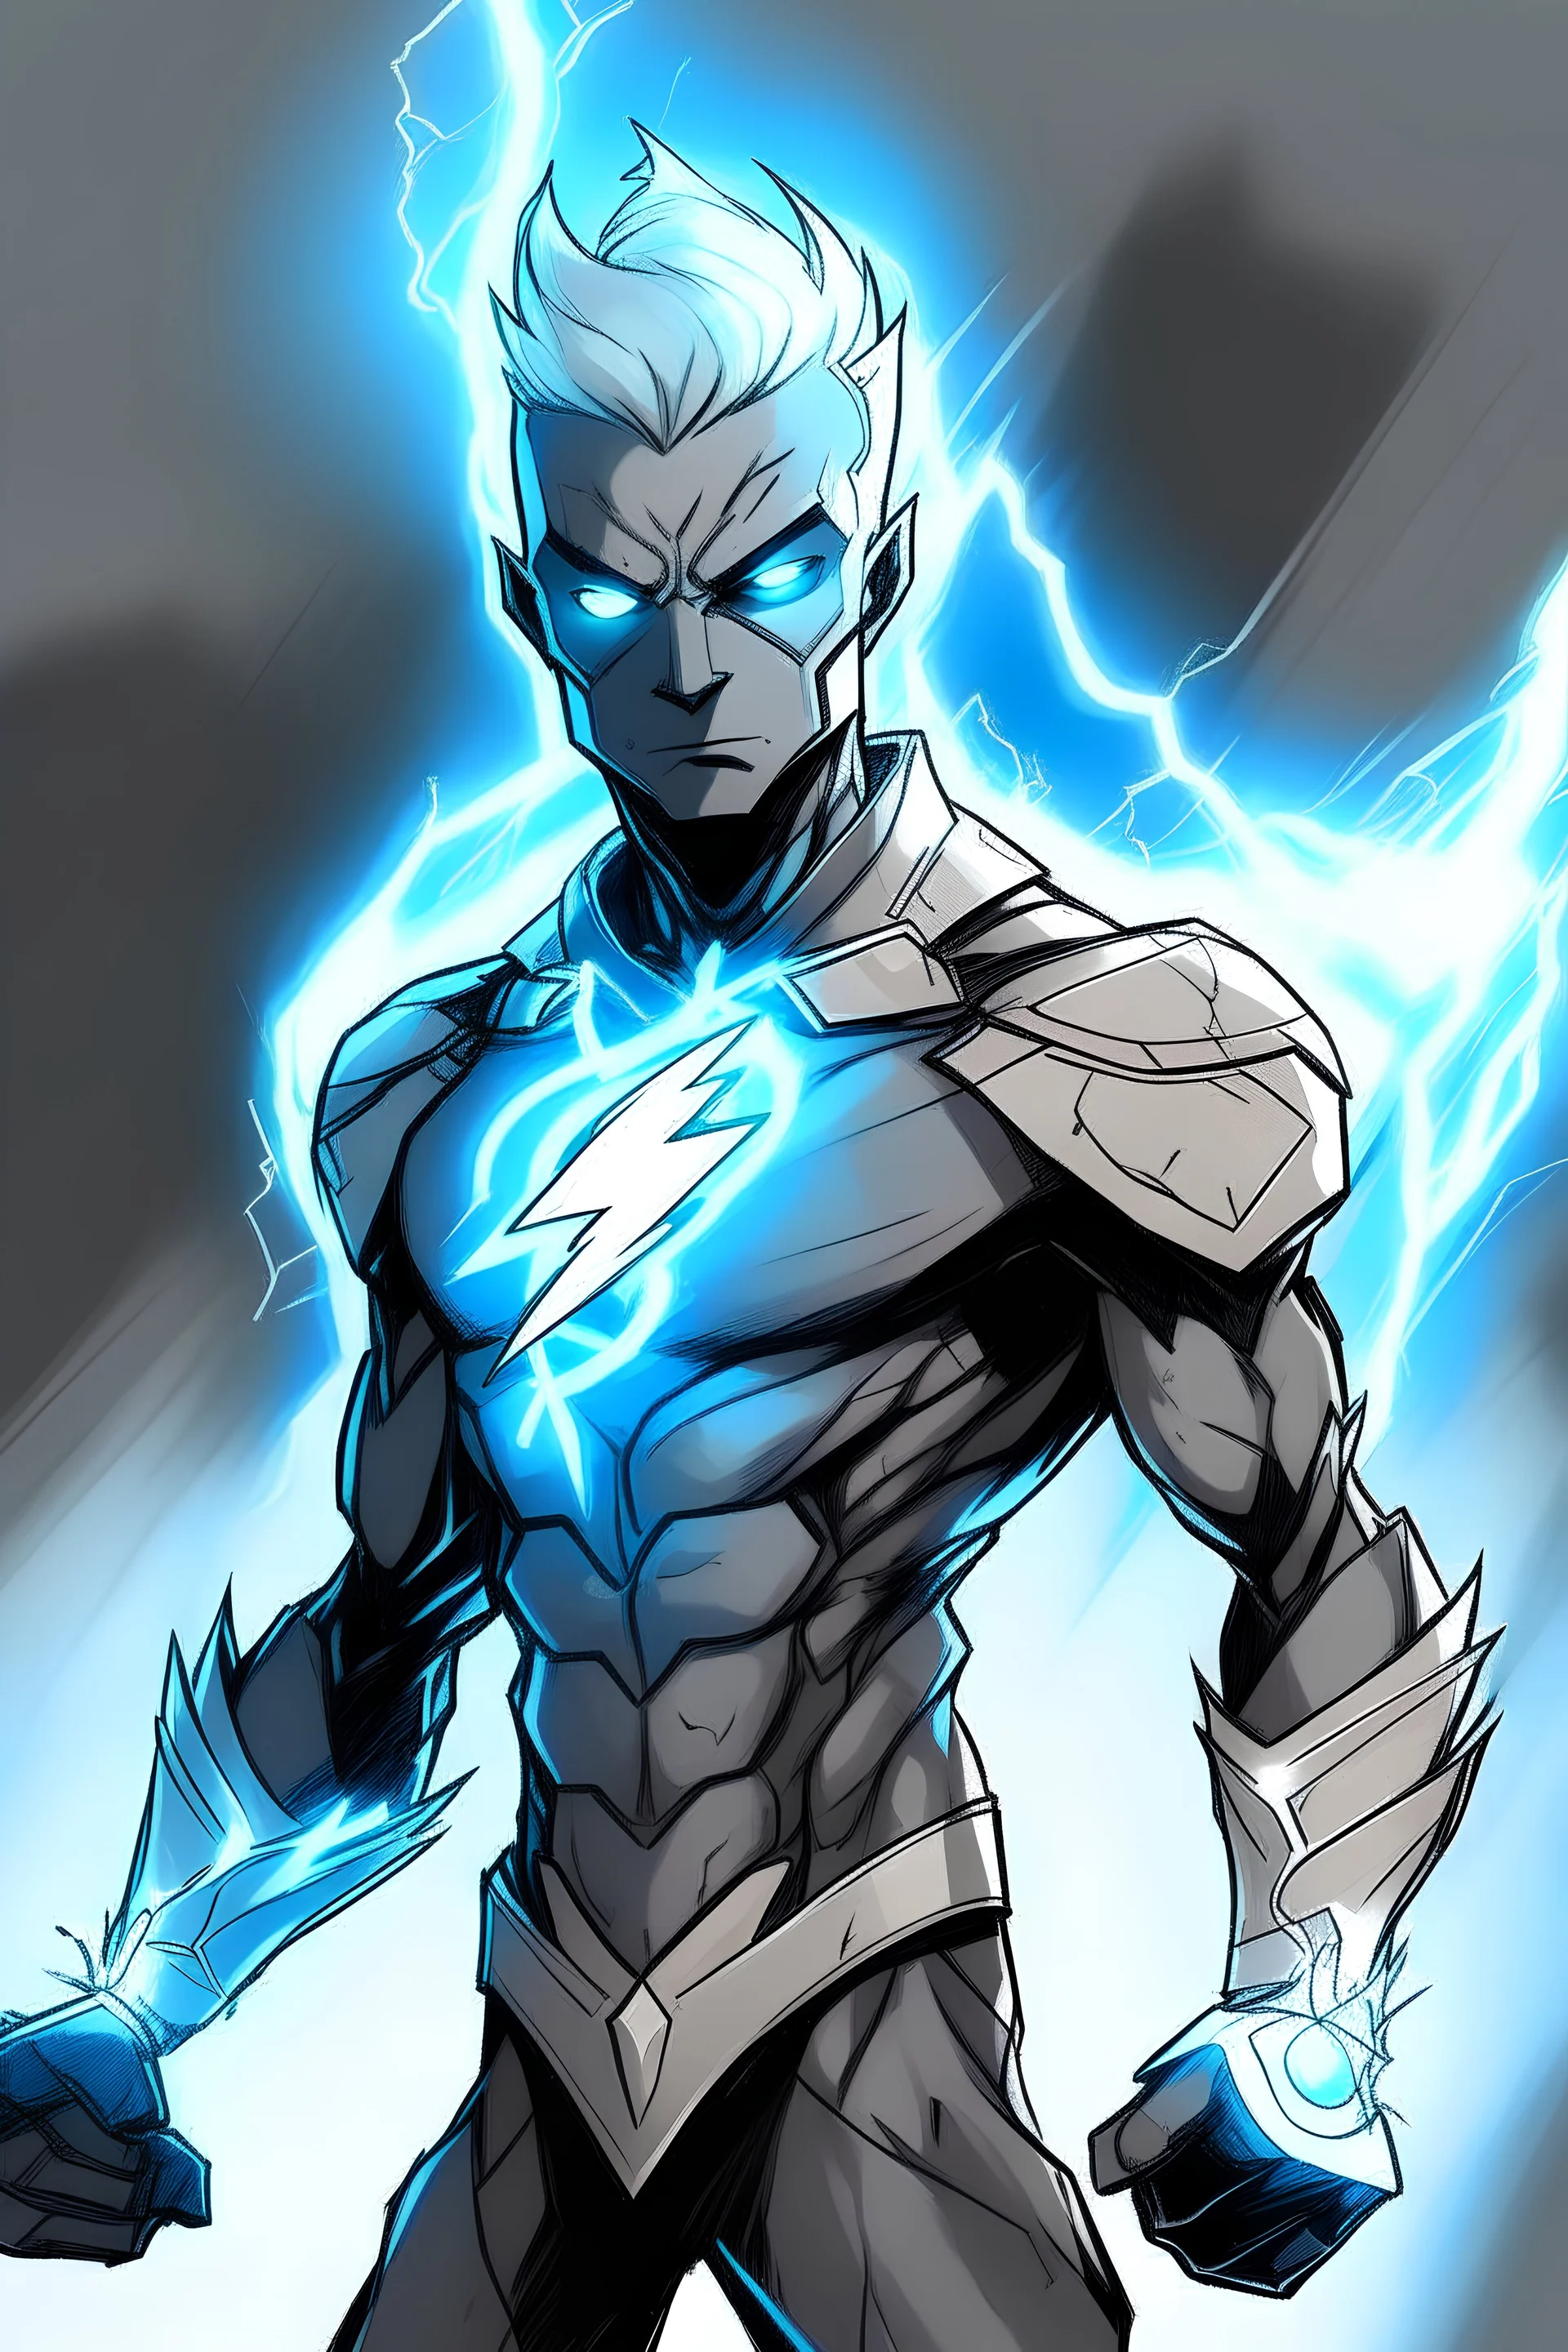 a drawing character that can control lighting and hes a superhero, hes kinda see through , and has a grey skin tone, and has a GYATT he has lightning surrounding him very fast, hes soft